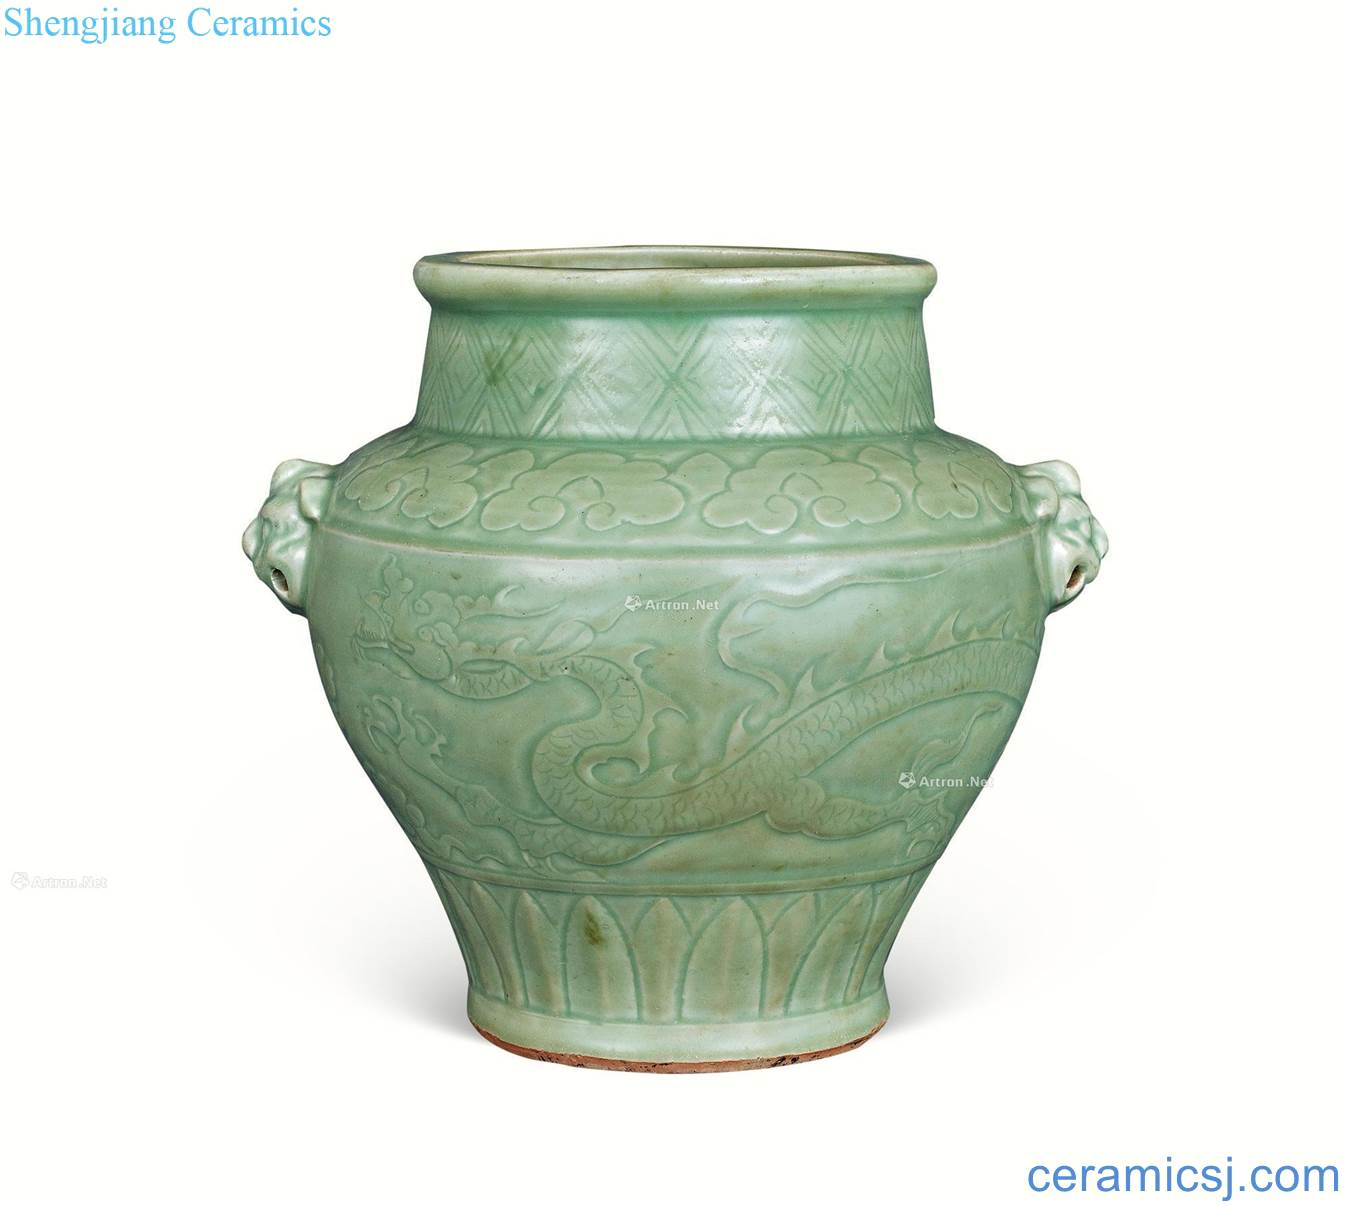 The yuan dynasty Longquan celadon dark carved decorative pattern spend double the first tank